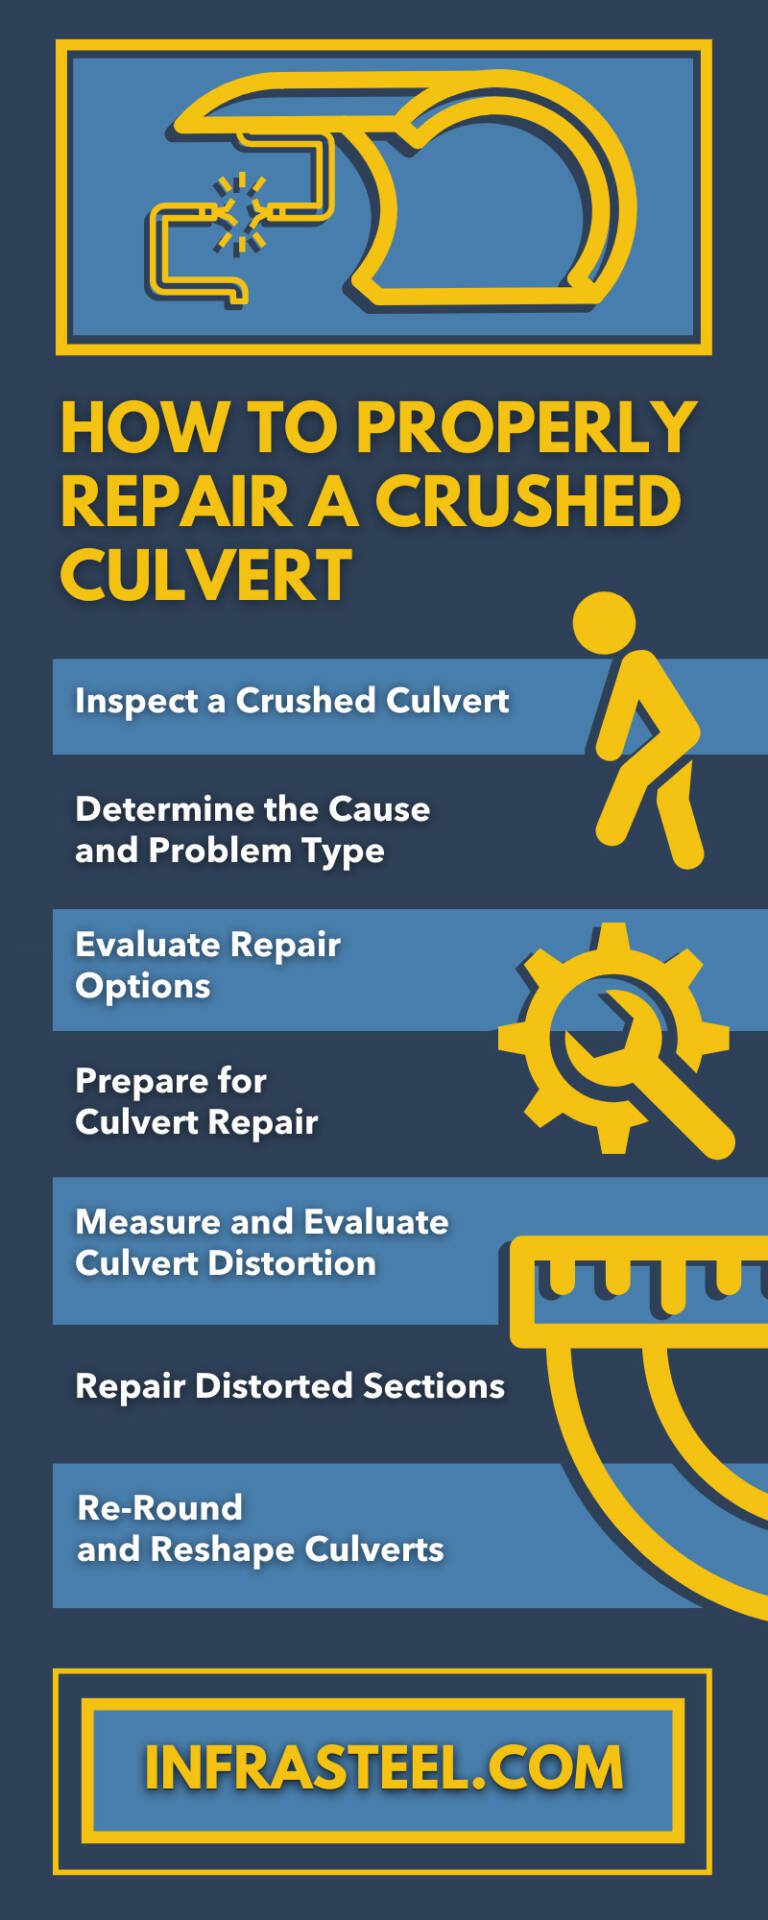 How To Properly Repair a Crushed Culvert 